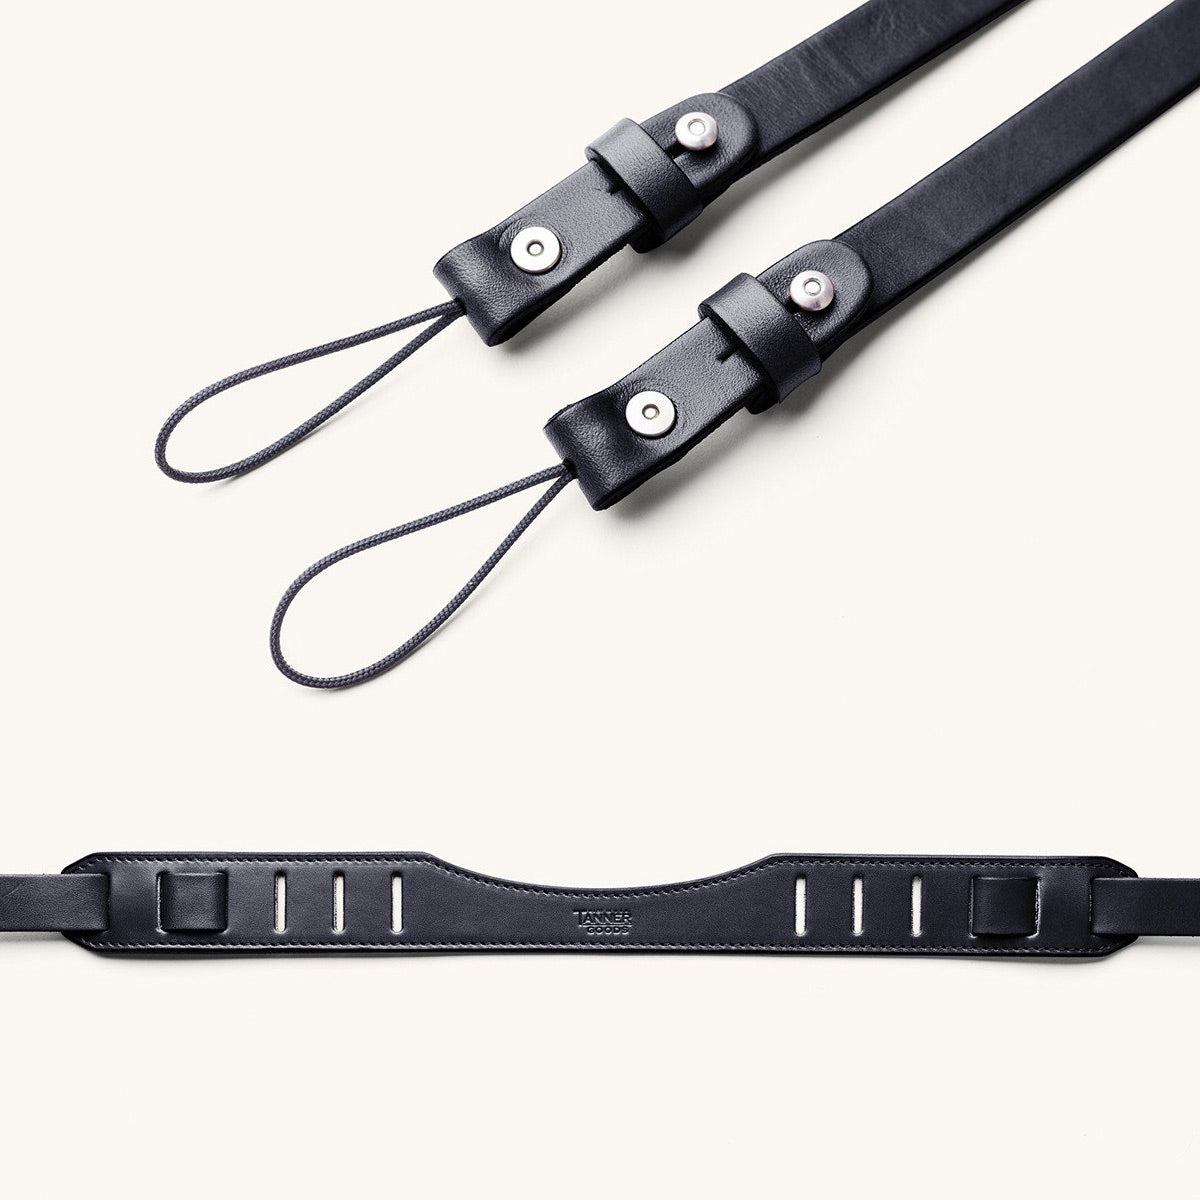 Two detailed shots of a black leather SLR camera strap.